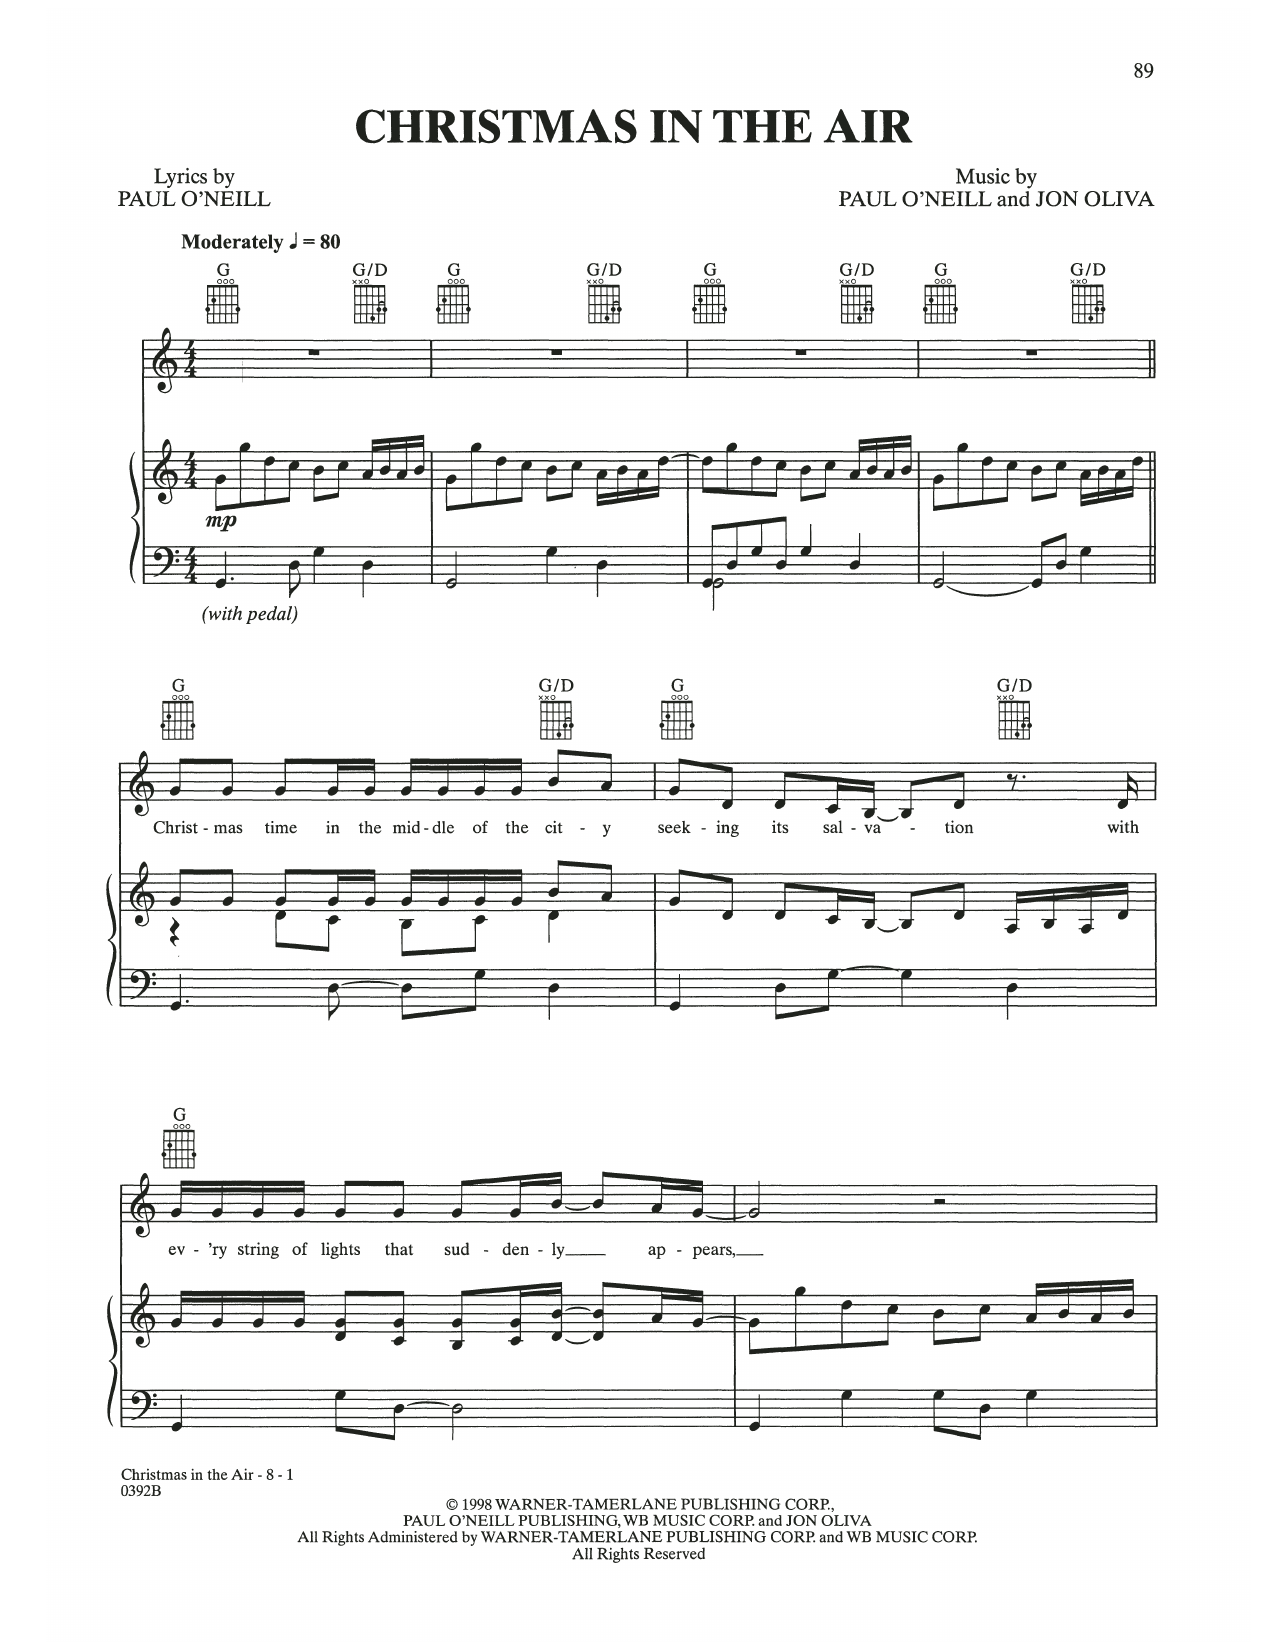 Download Trans-Siberian Orchestra Christmas In The Air Sheet Music